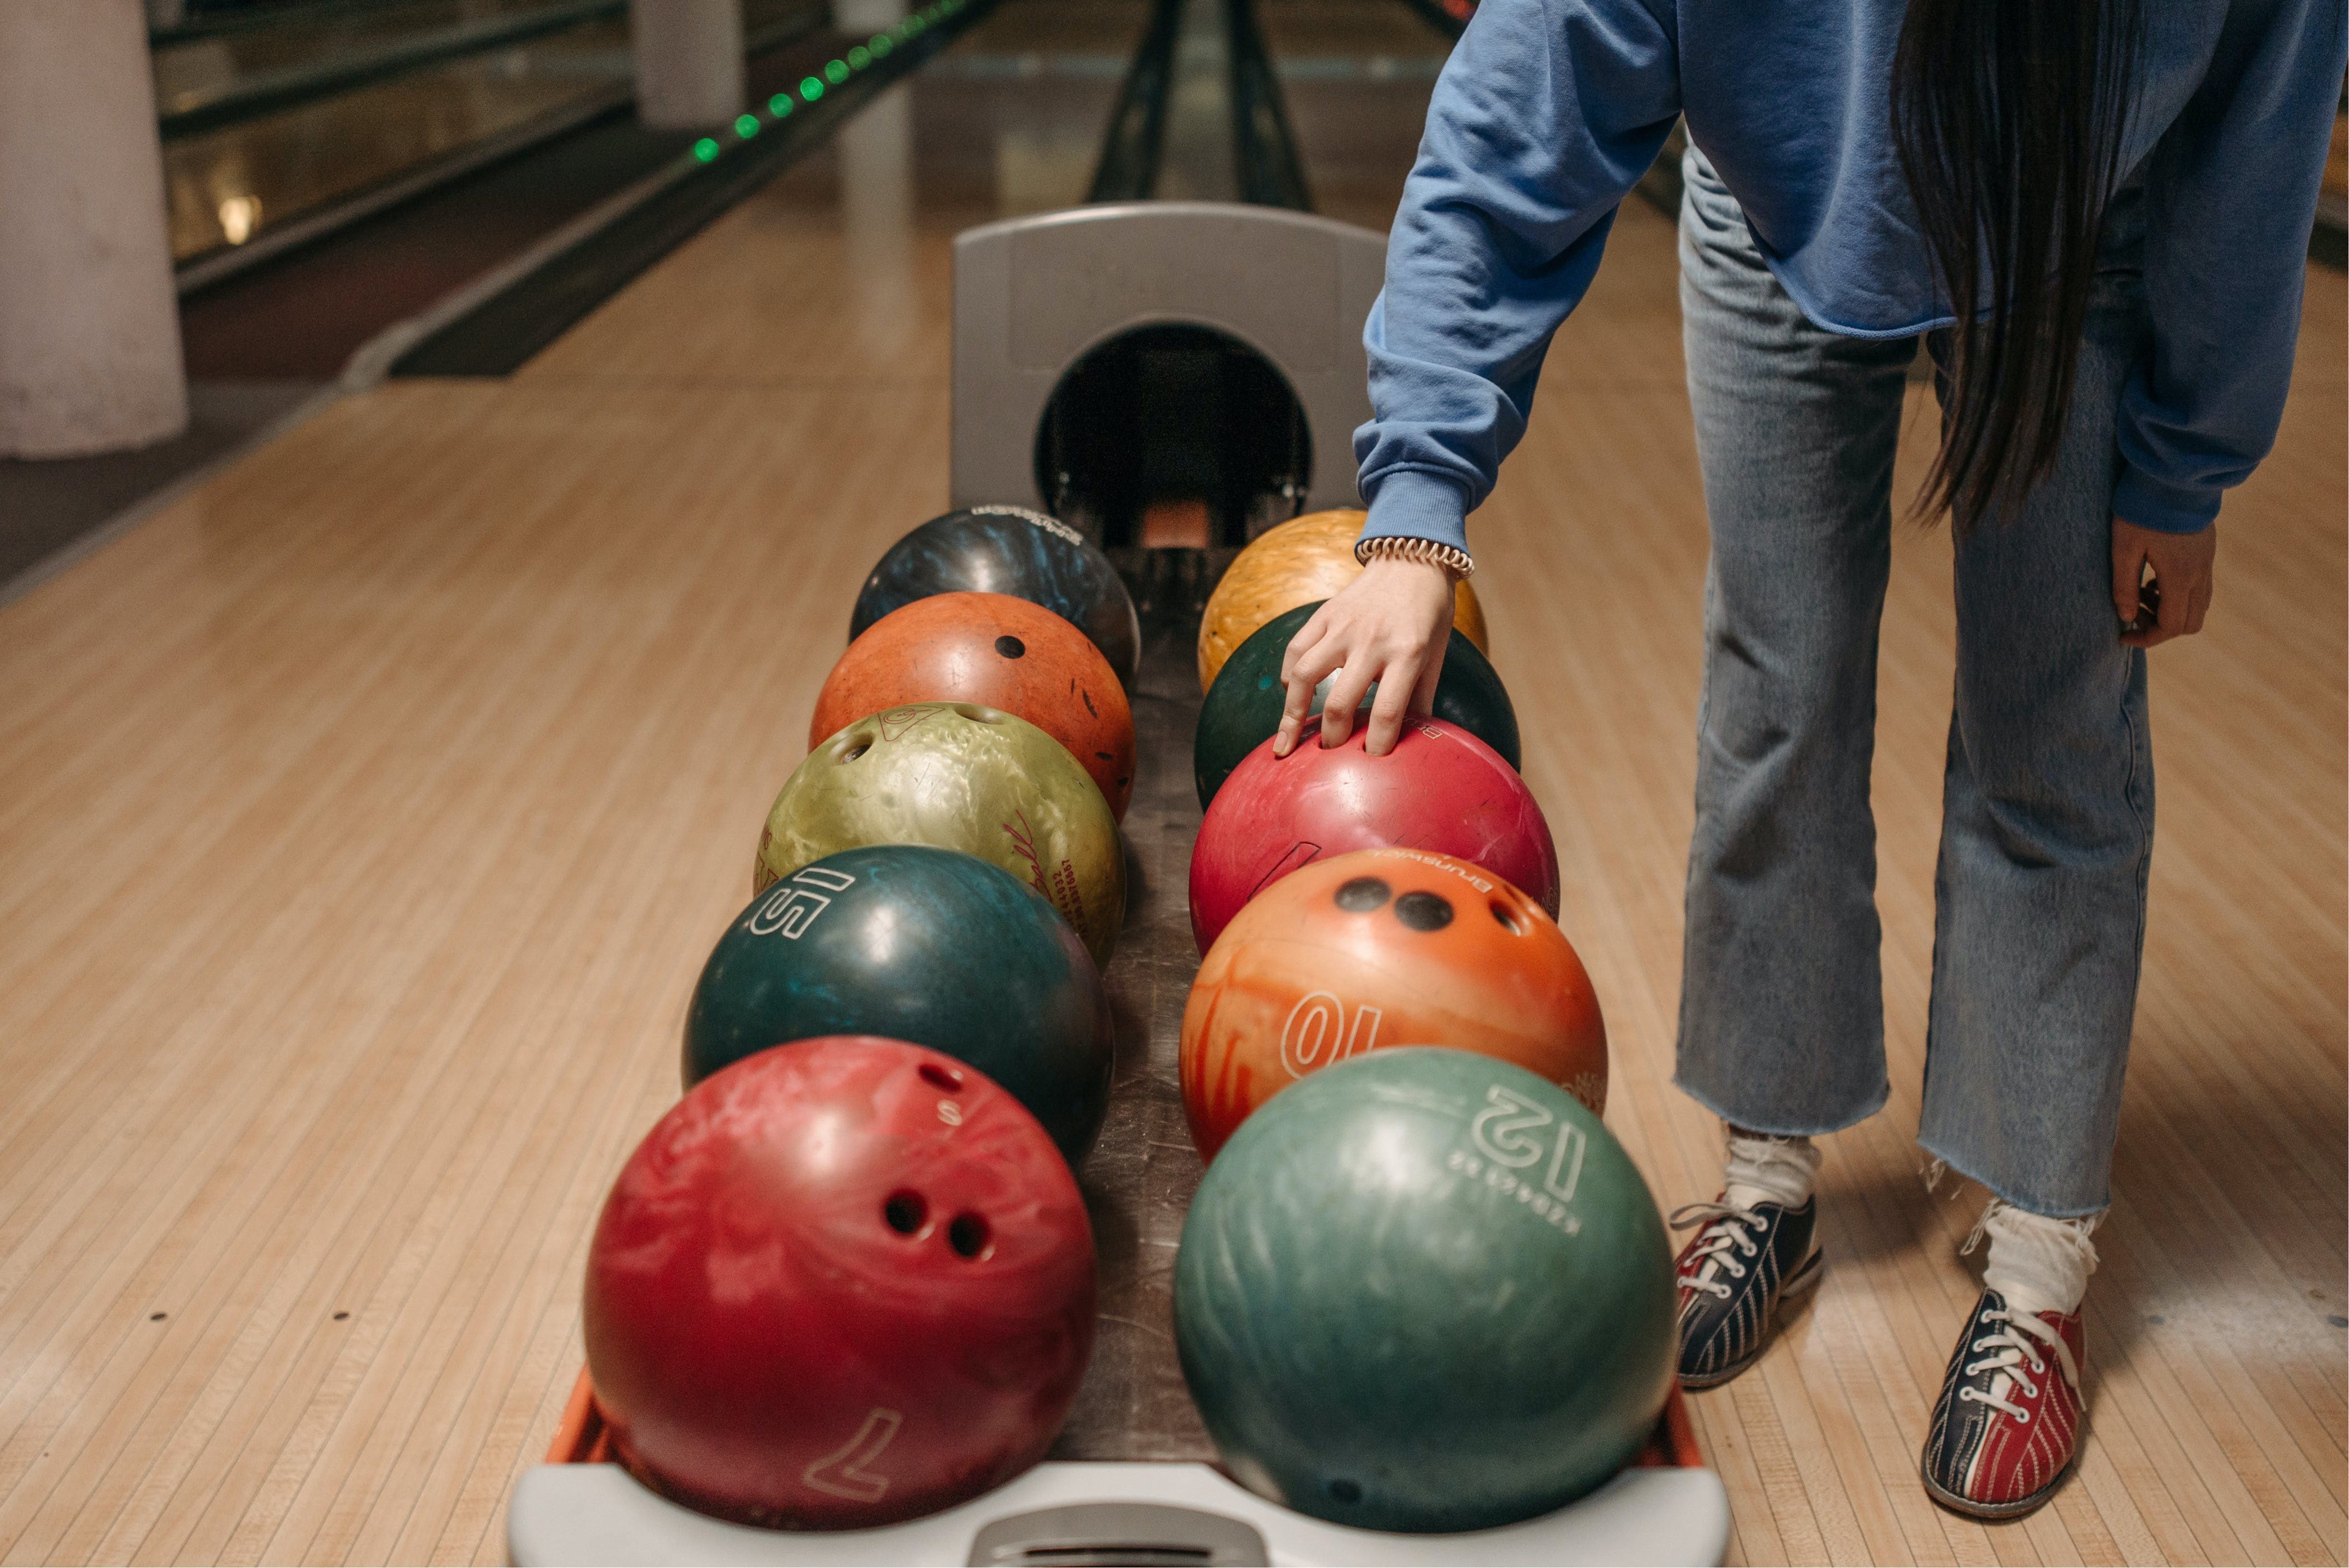 How To Hold a Bowling Ball Properly